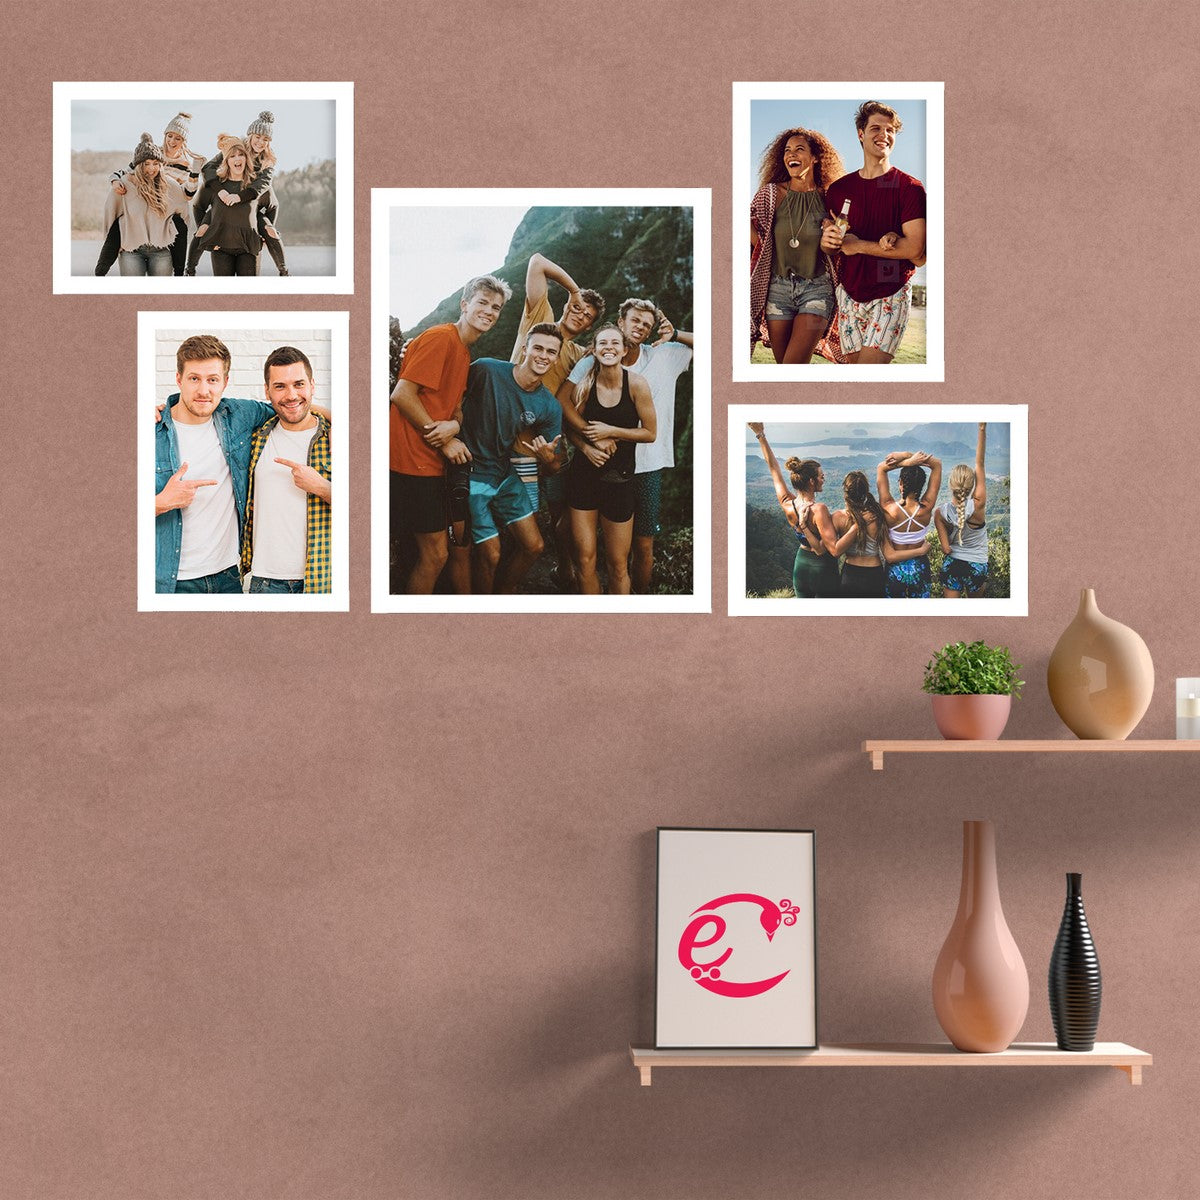 Memory Wall Collage Photo Frame - Set of 5 Photo Frames for 4 Photos of 5"x7", 1 Photos of 8"x10" 1